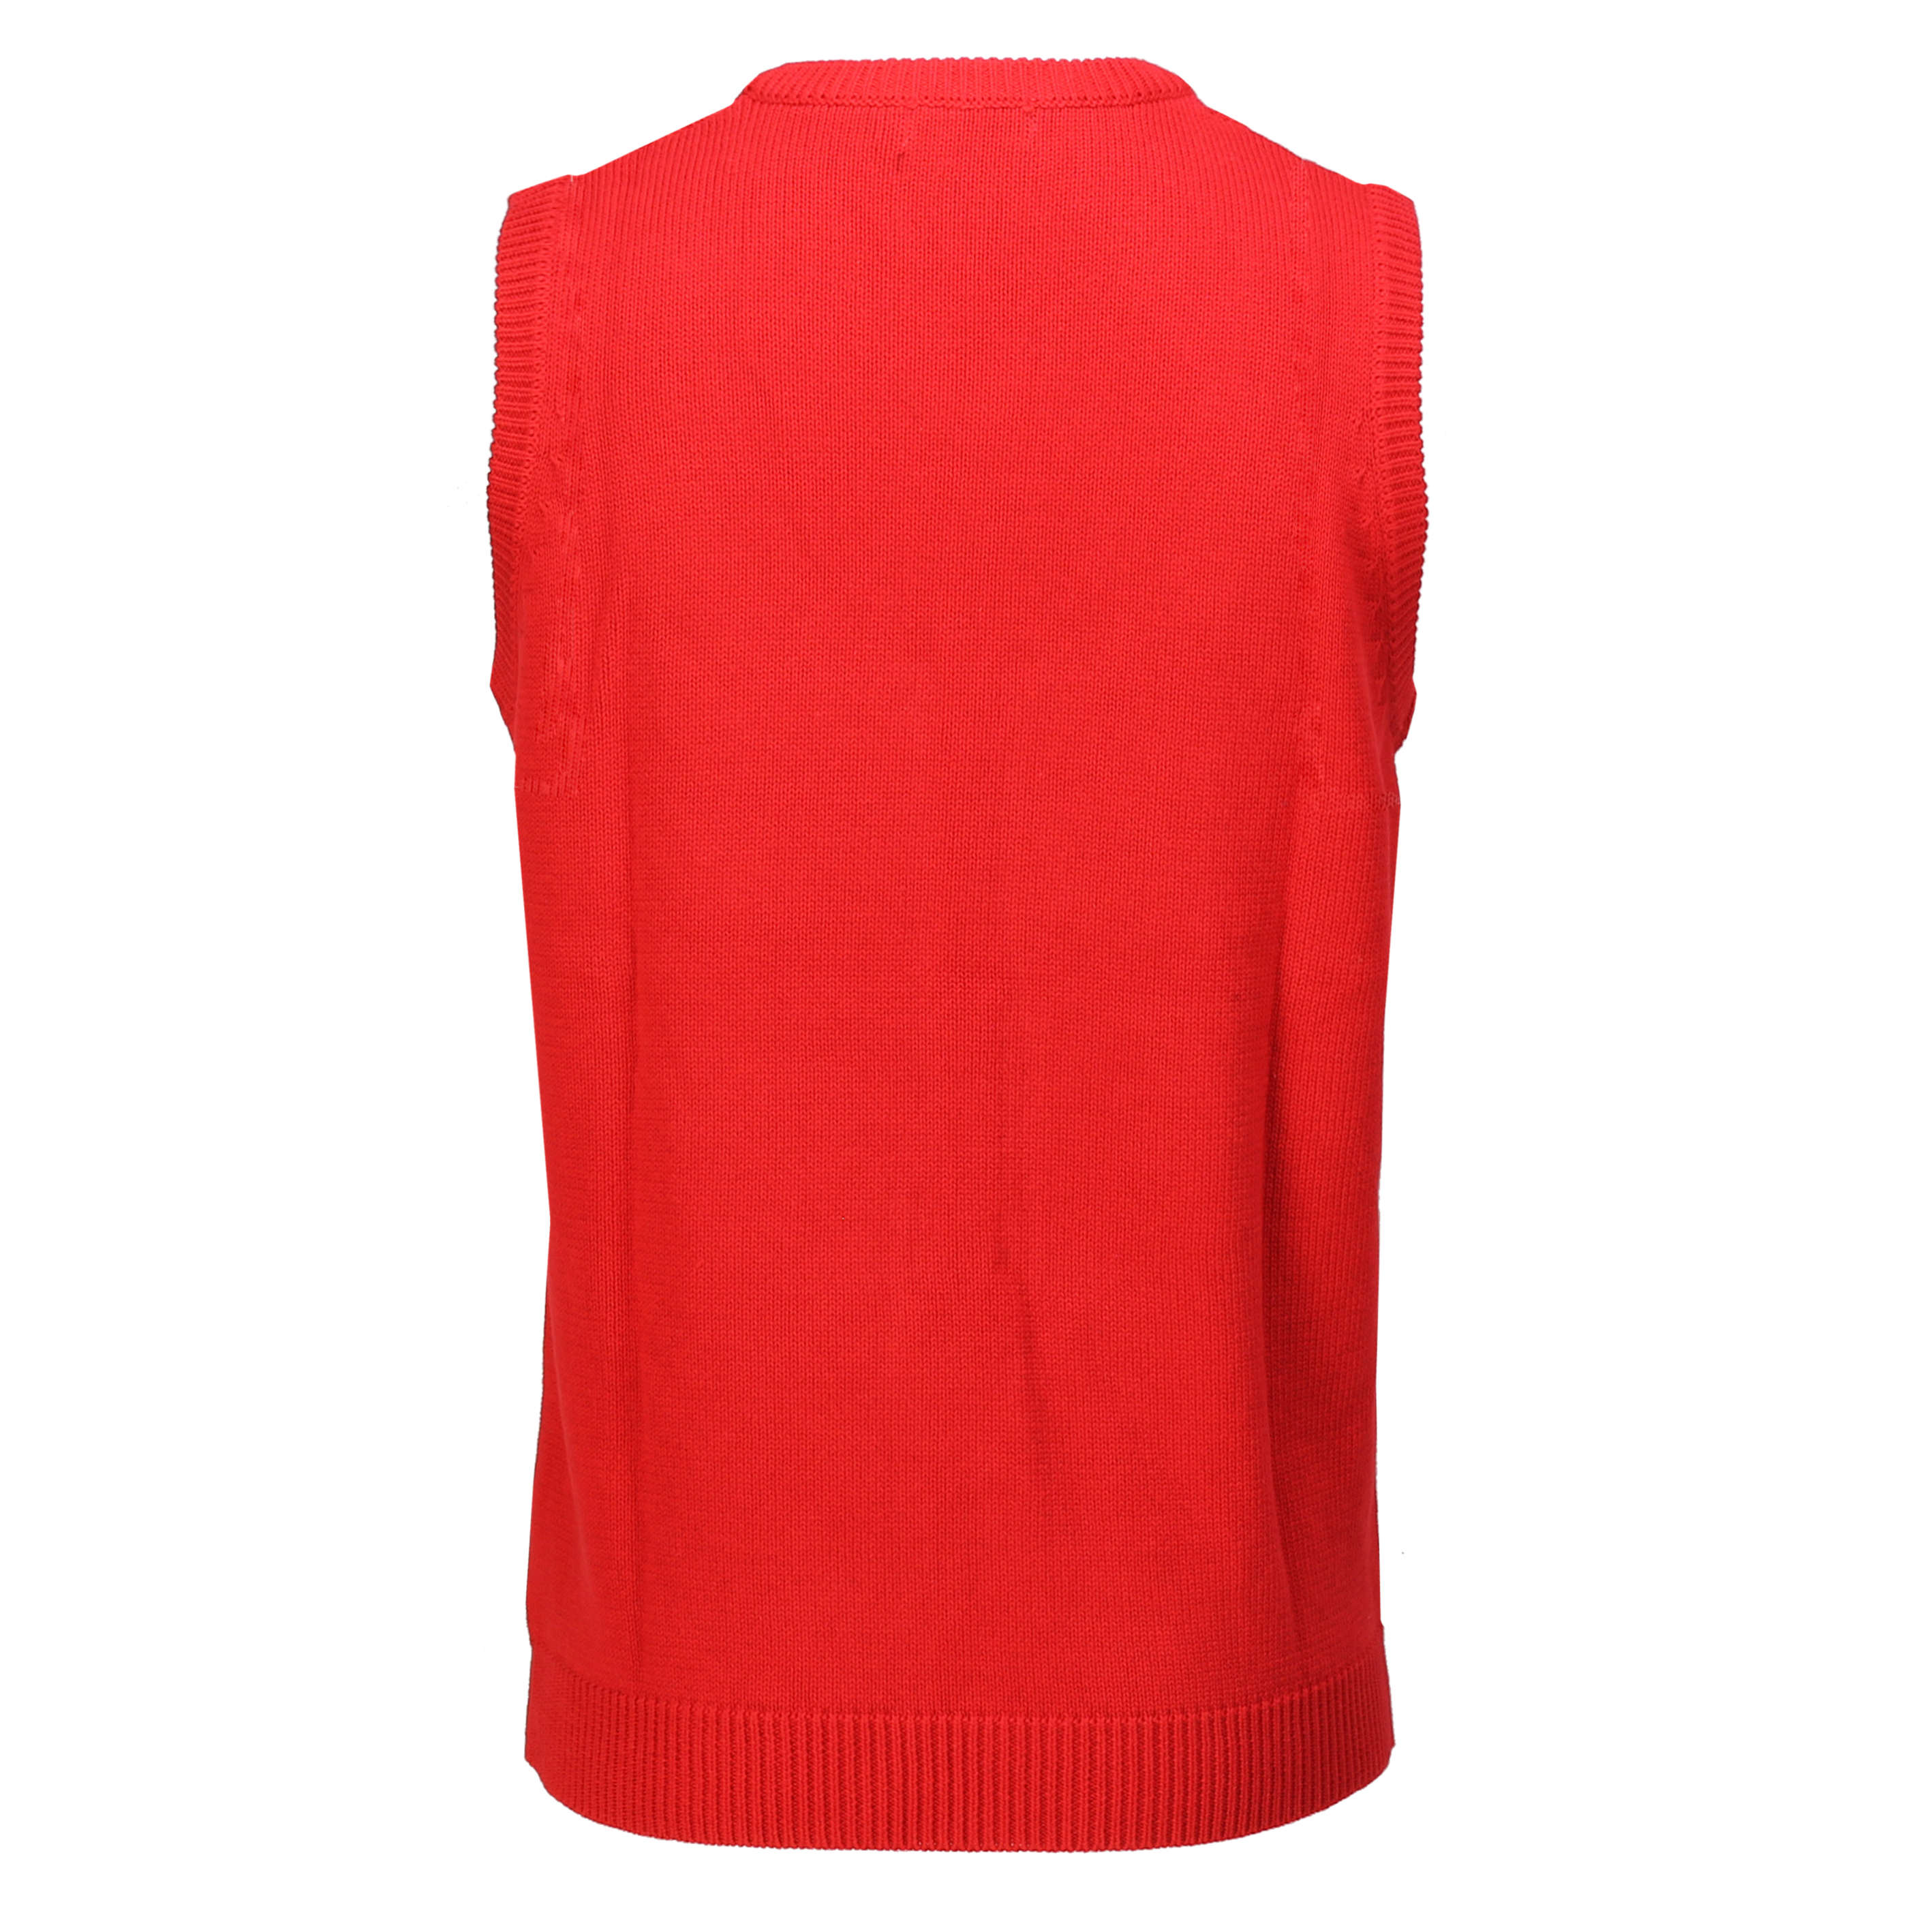 Classic Sleeveless V Neck Red Jumper Cable Knitted